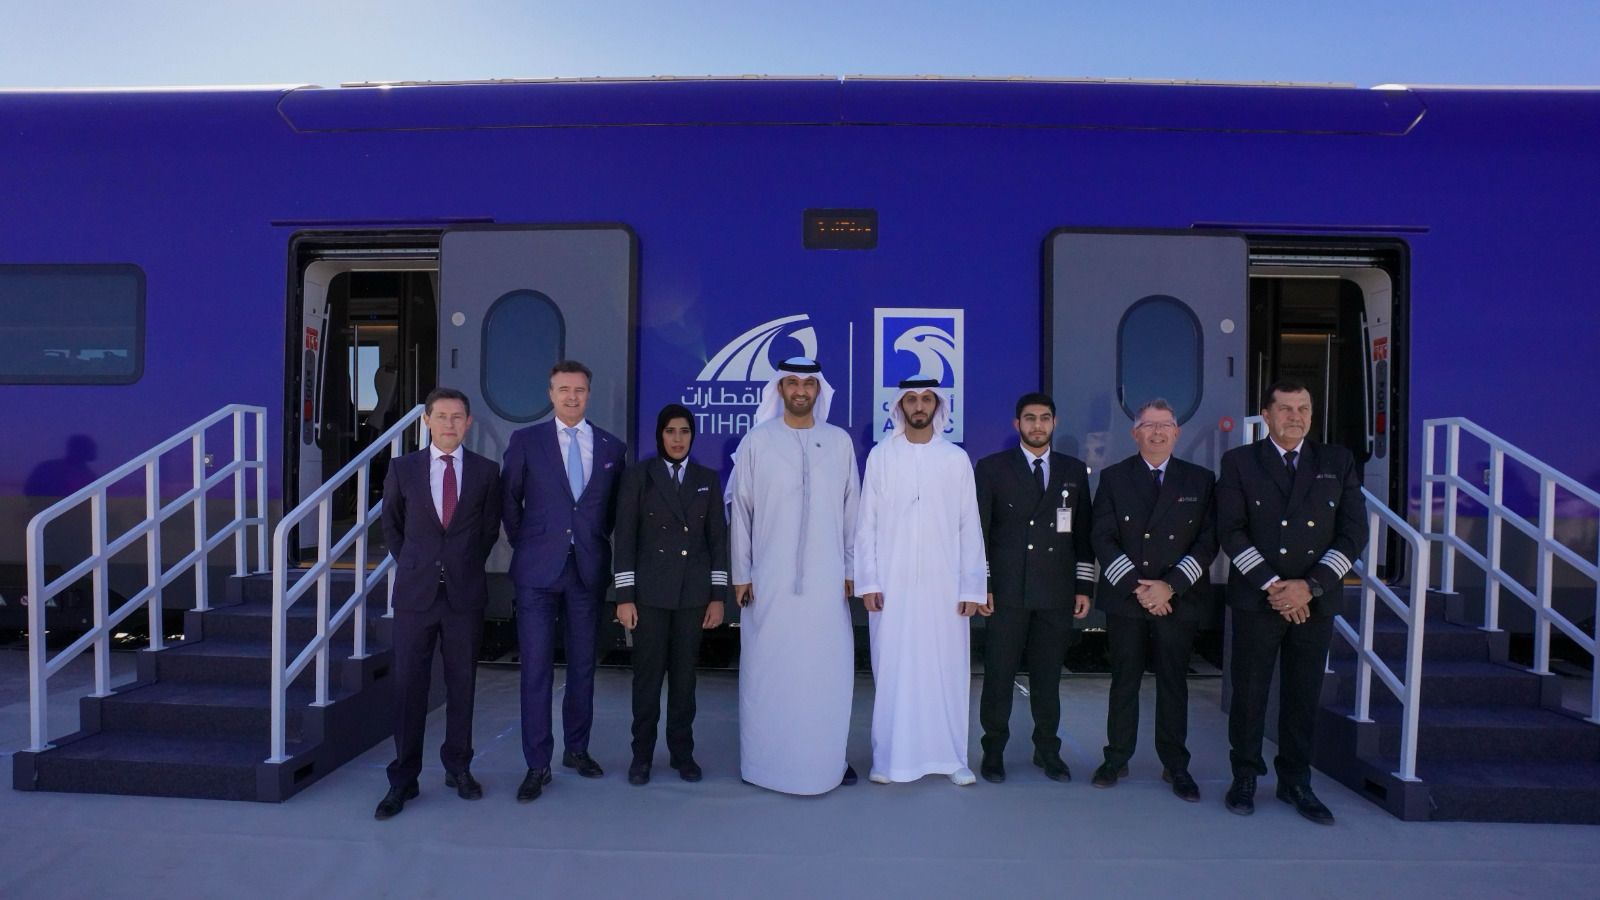 ADNOC executive leadership join first rail journey between Abu Dhabi City and Al Dhannah City